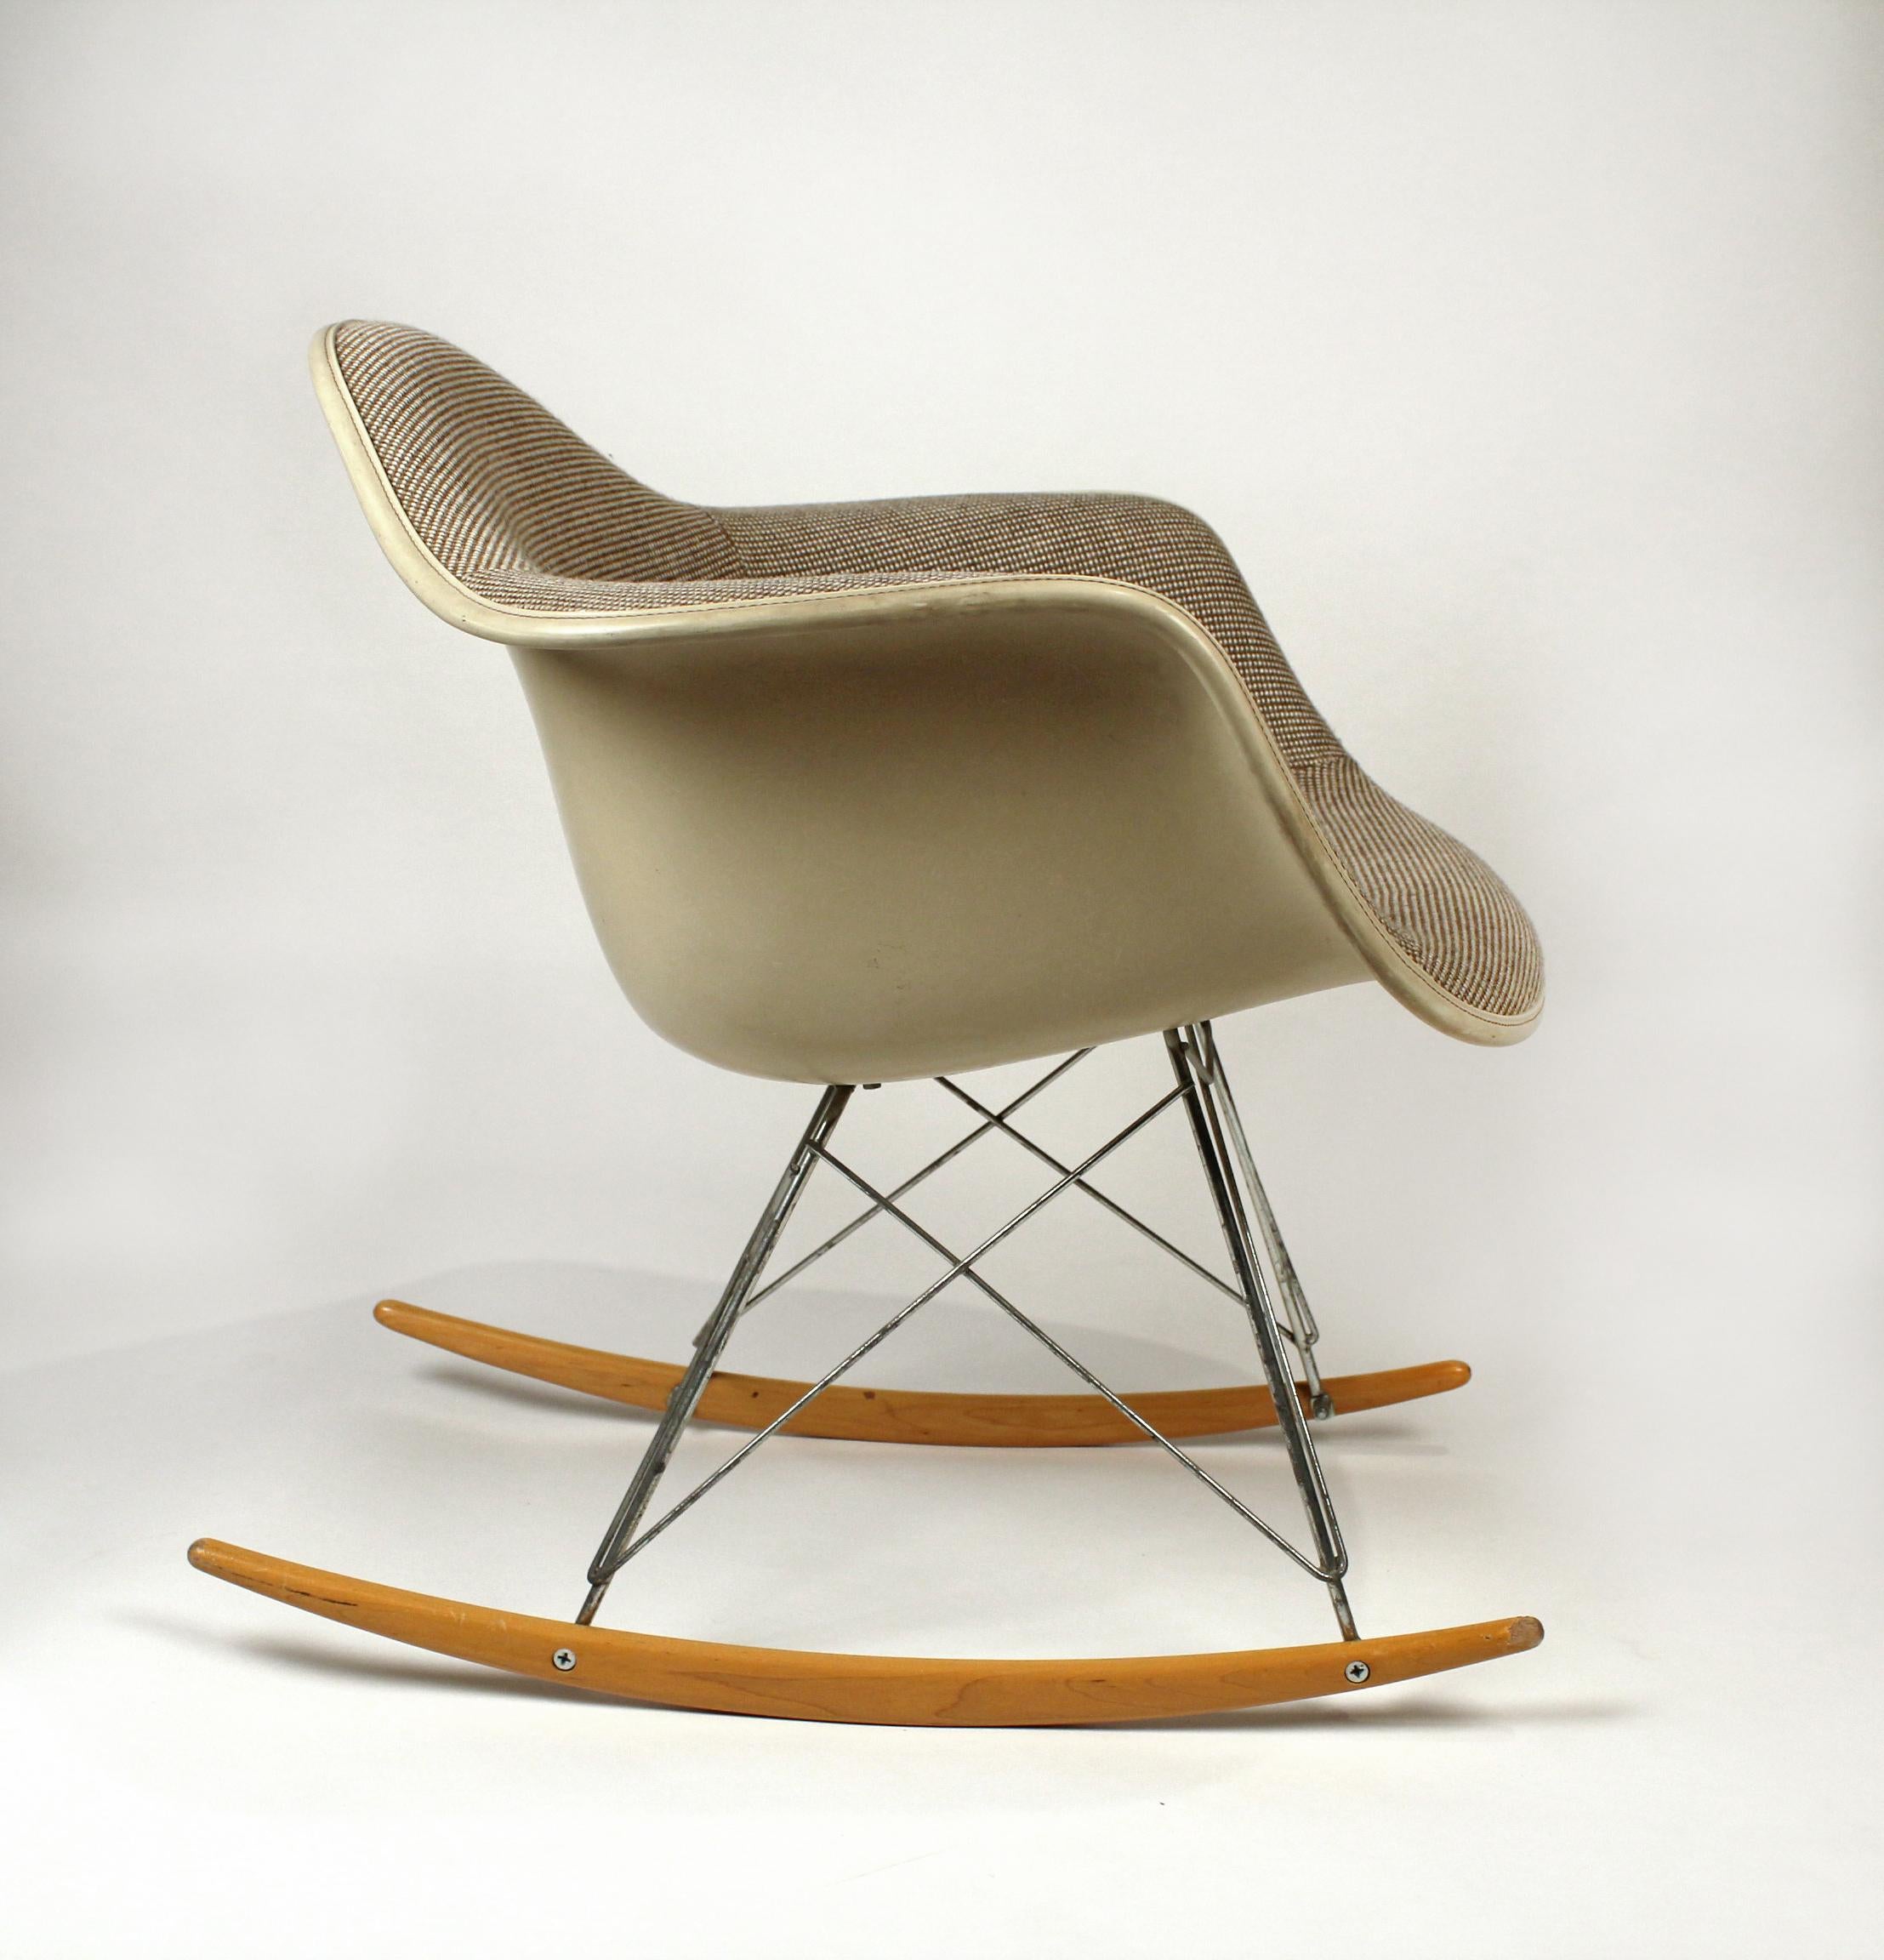 Matching pair of rocking chairs designed by Charles Eames for Herman Miller. Chairs have the original Alexander Girard upholstery - excellent original condition with the original zinc bases and birch rockers.